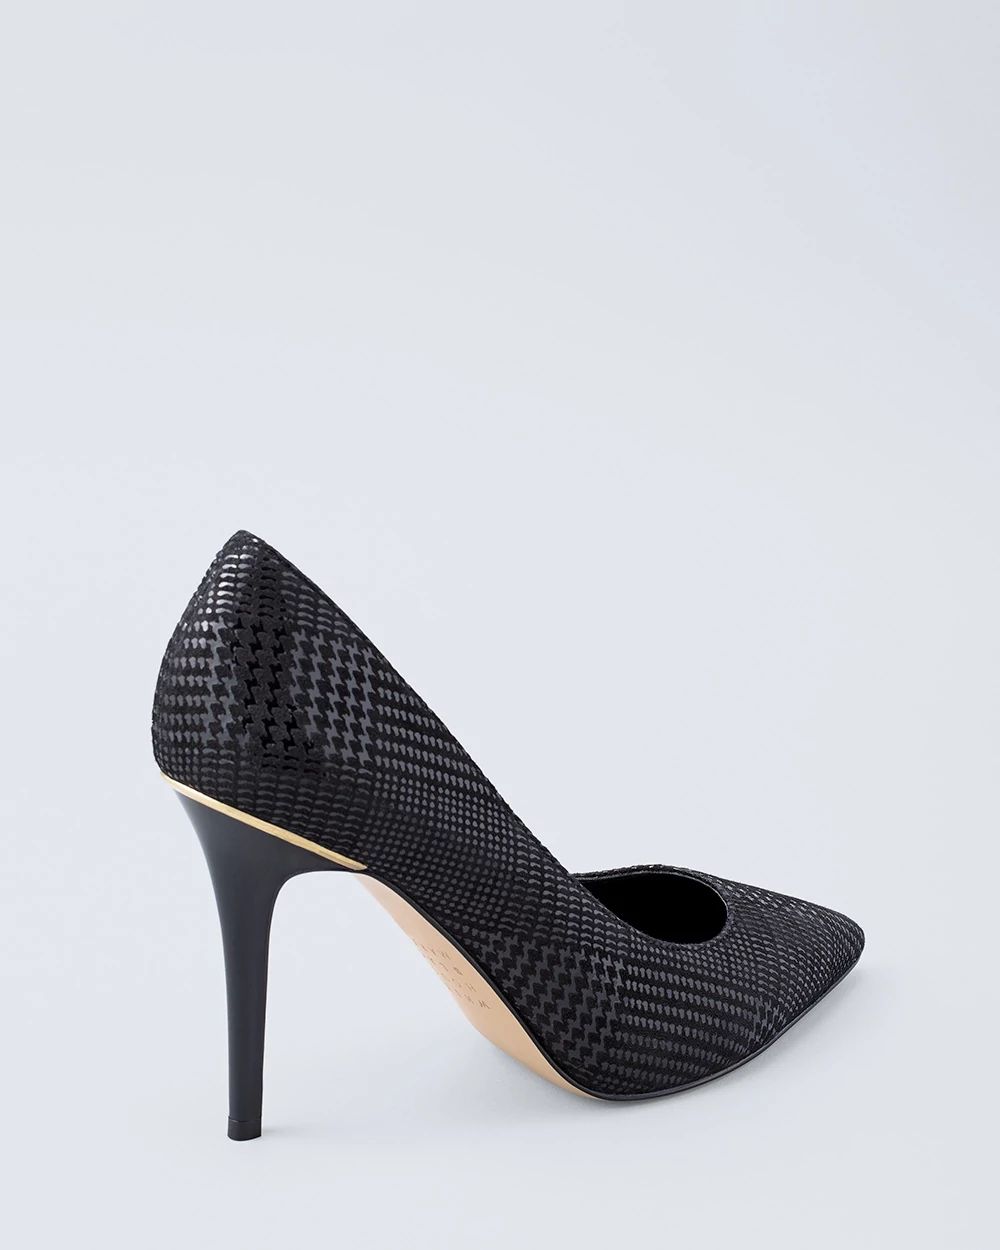 Olivia Croc-Embossed Leather Heels click to view larger image.